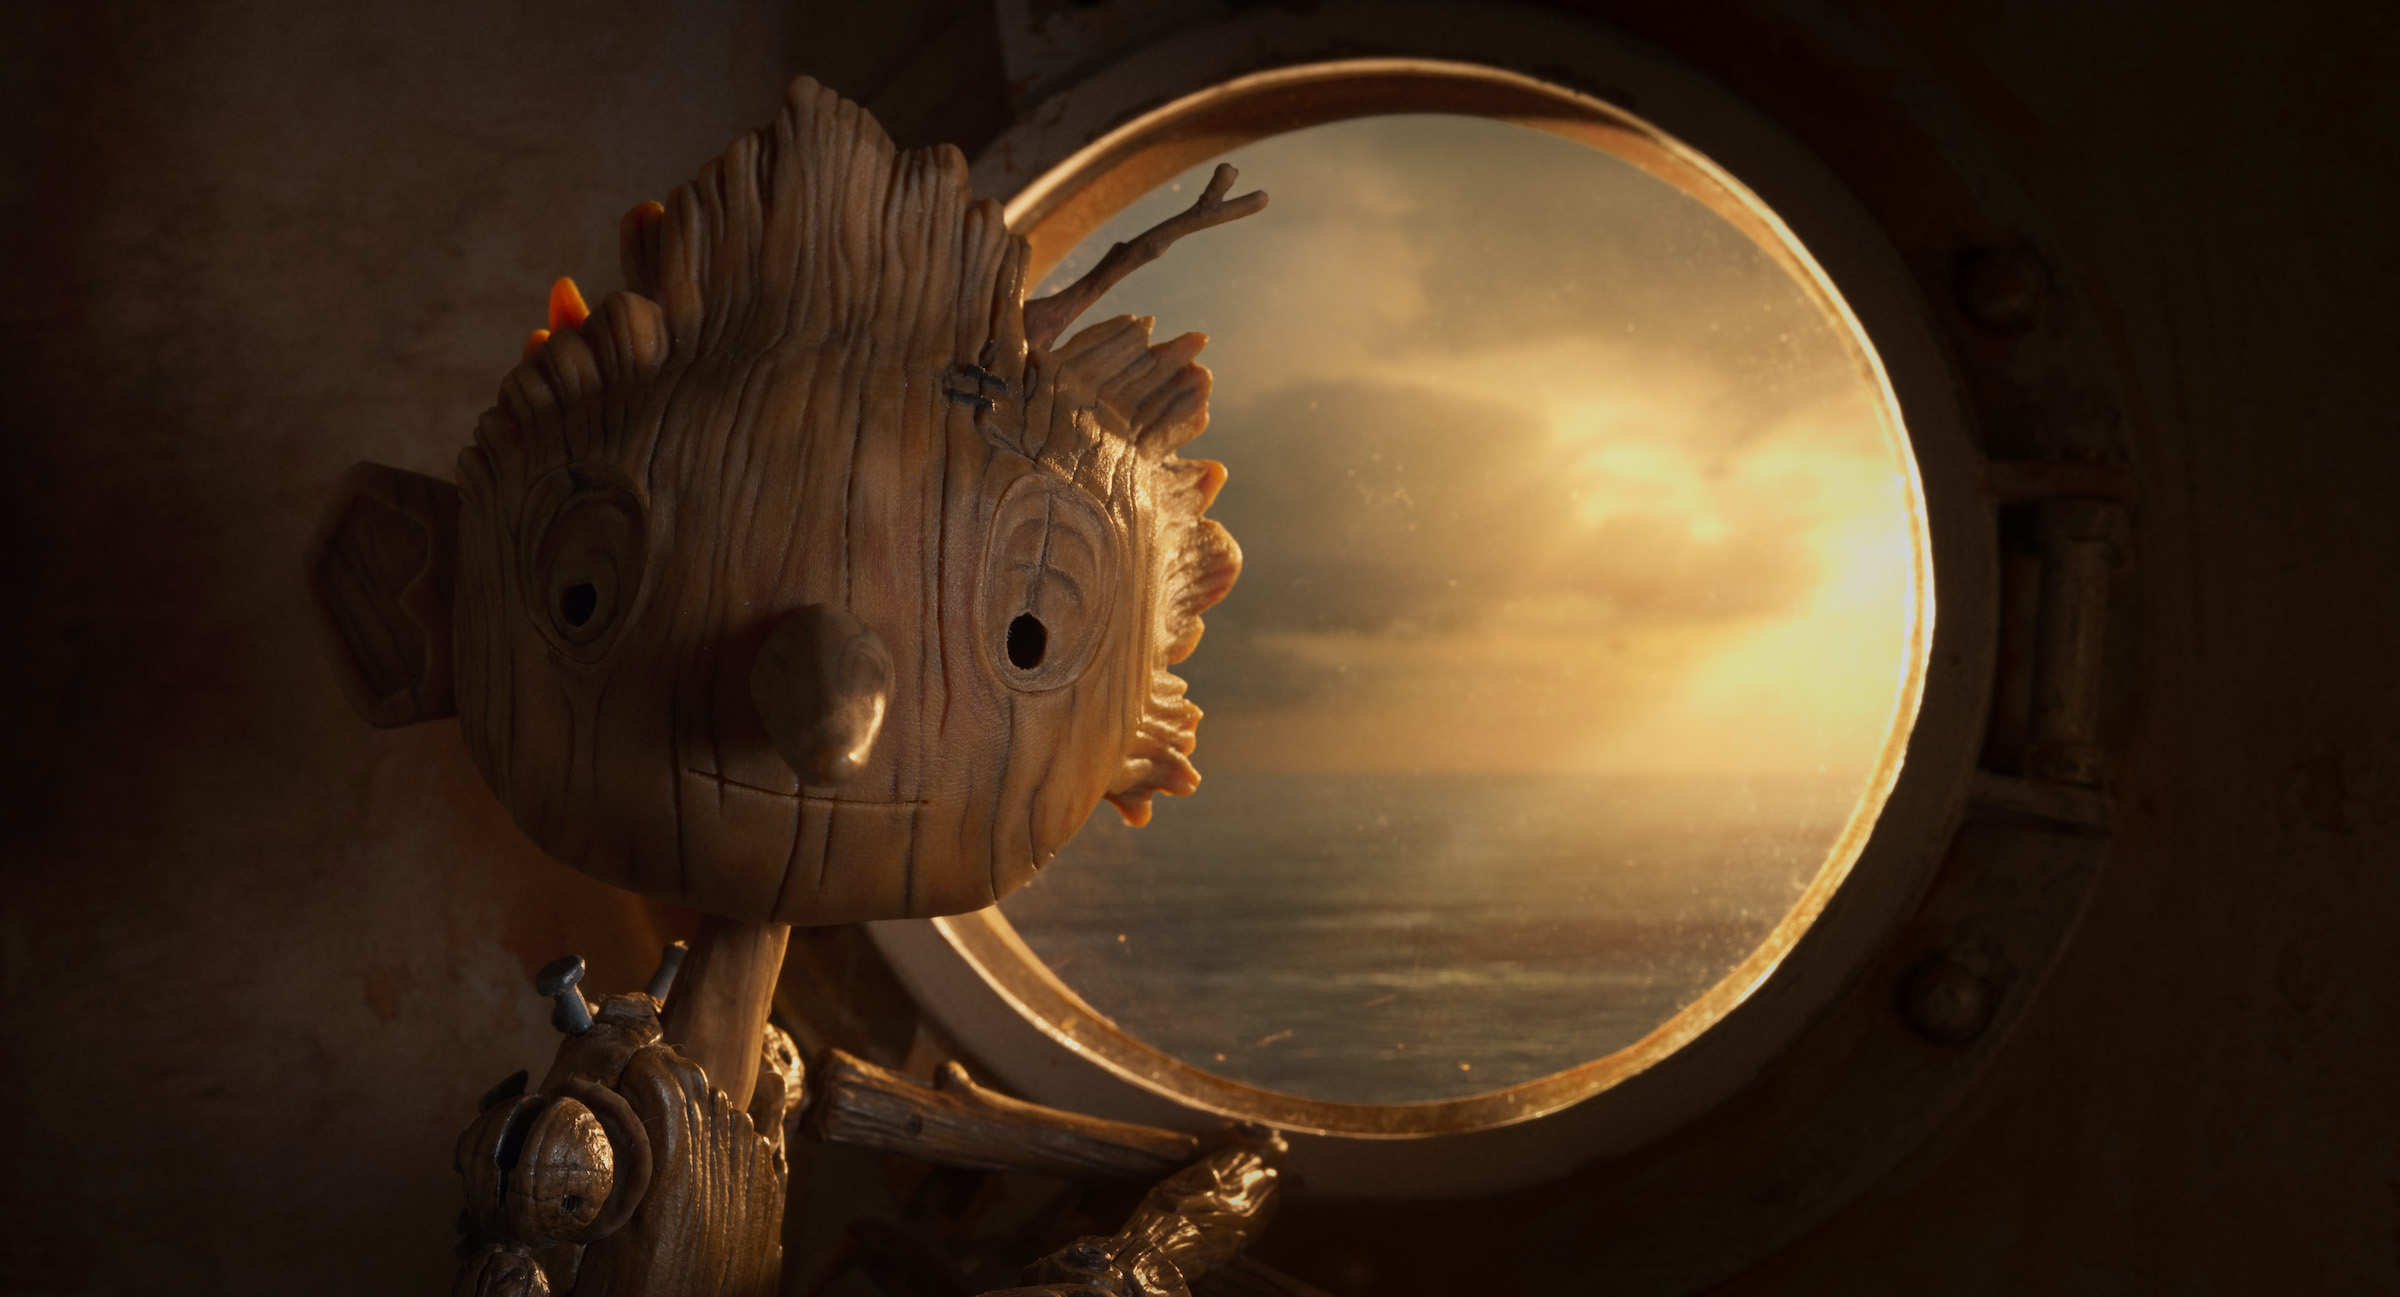 Pinocchio stands in front of a round portal window, sunlight streaming in behind him.